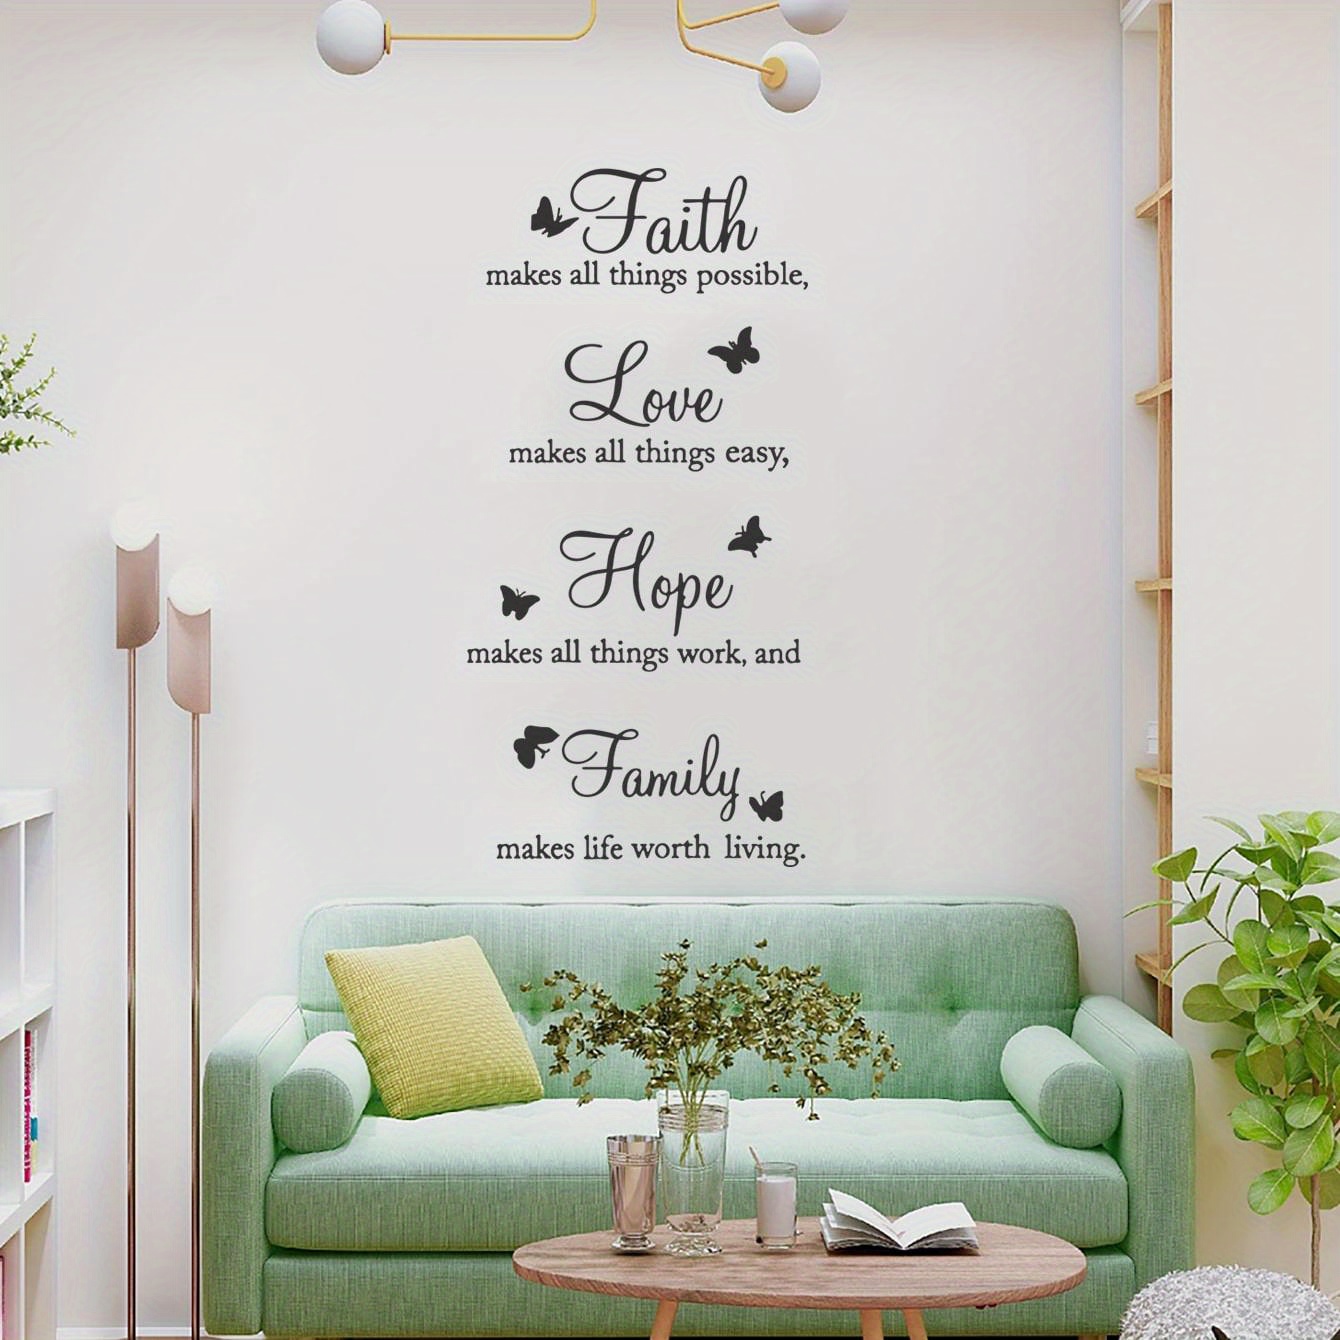 tjapalo® pkm489 Wall Tattoo “Believe in Wunder Love and Happy” Wall Sticker  Living Room Saying Wall Sticker Faith Wall Sticker Sayings, green :  : DIY & Tools